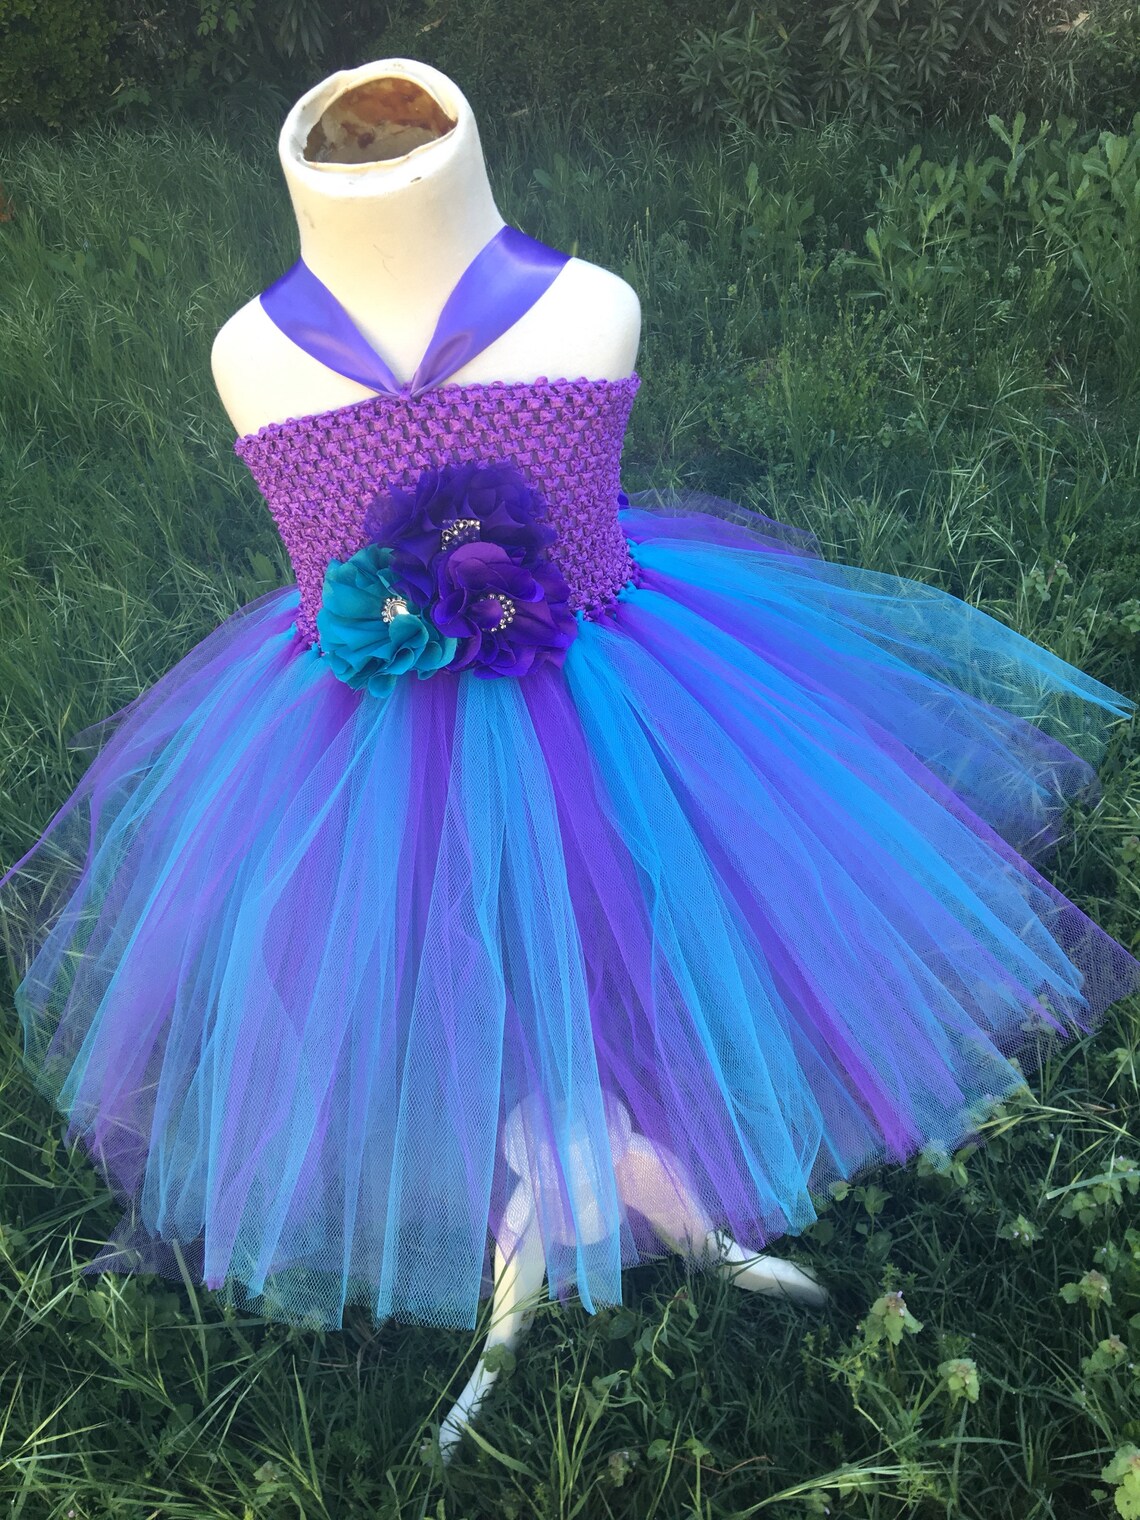 Purple and Turquoise Tulle dress flower girl dress up | Etsy